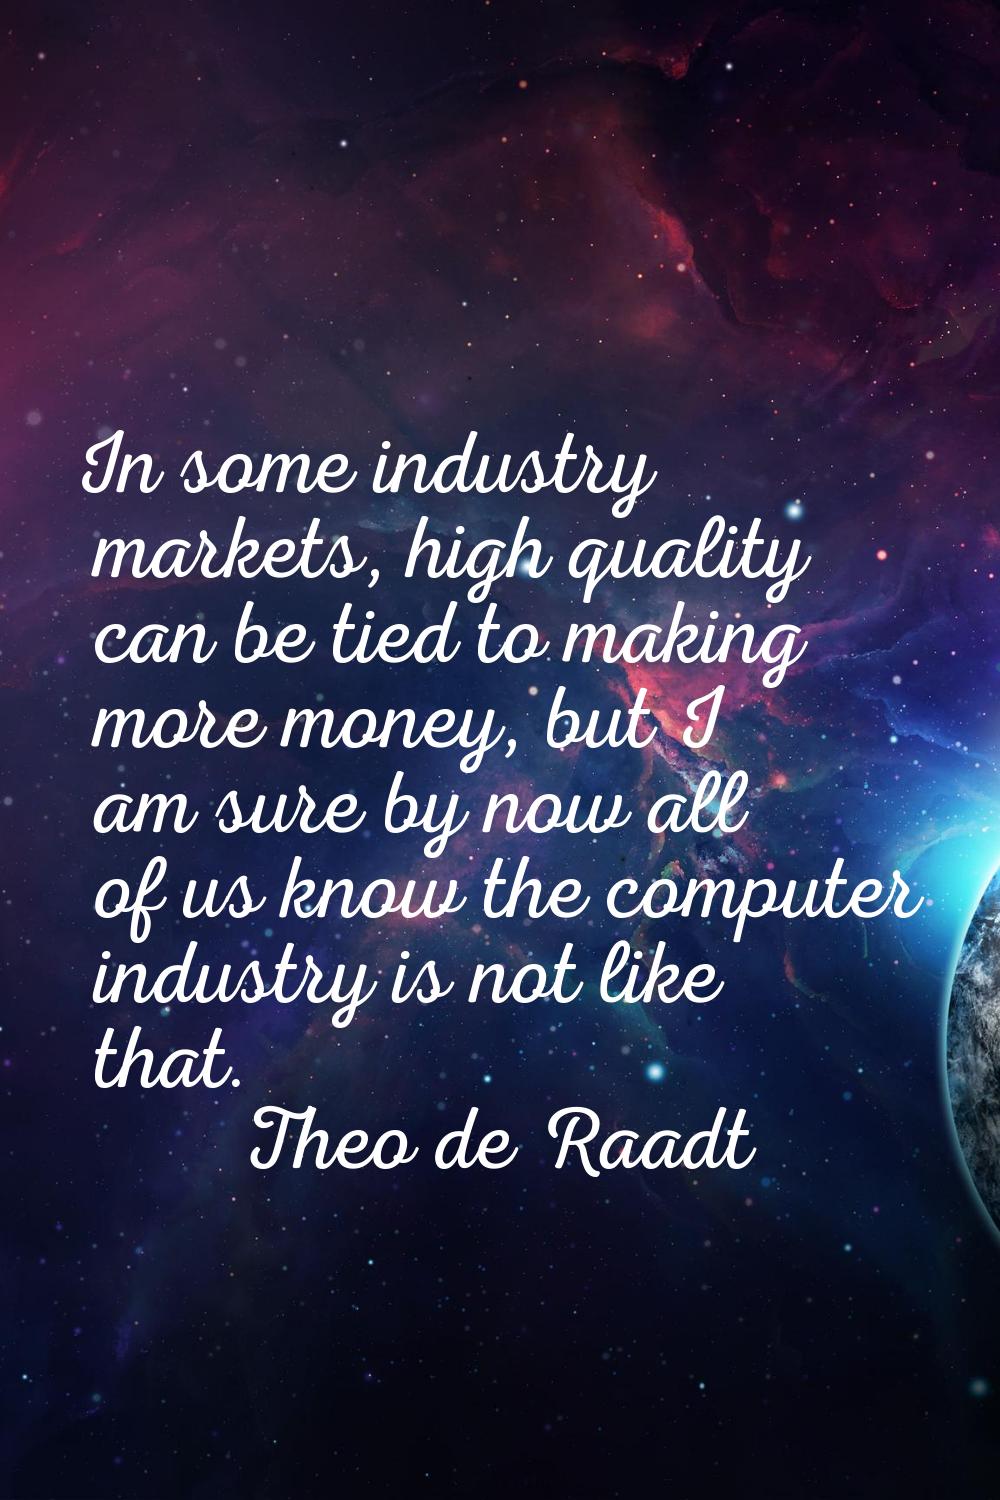 In some industry markets, high quality can be tied to making more money, but I am sure by now all o